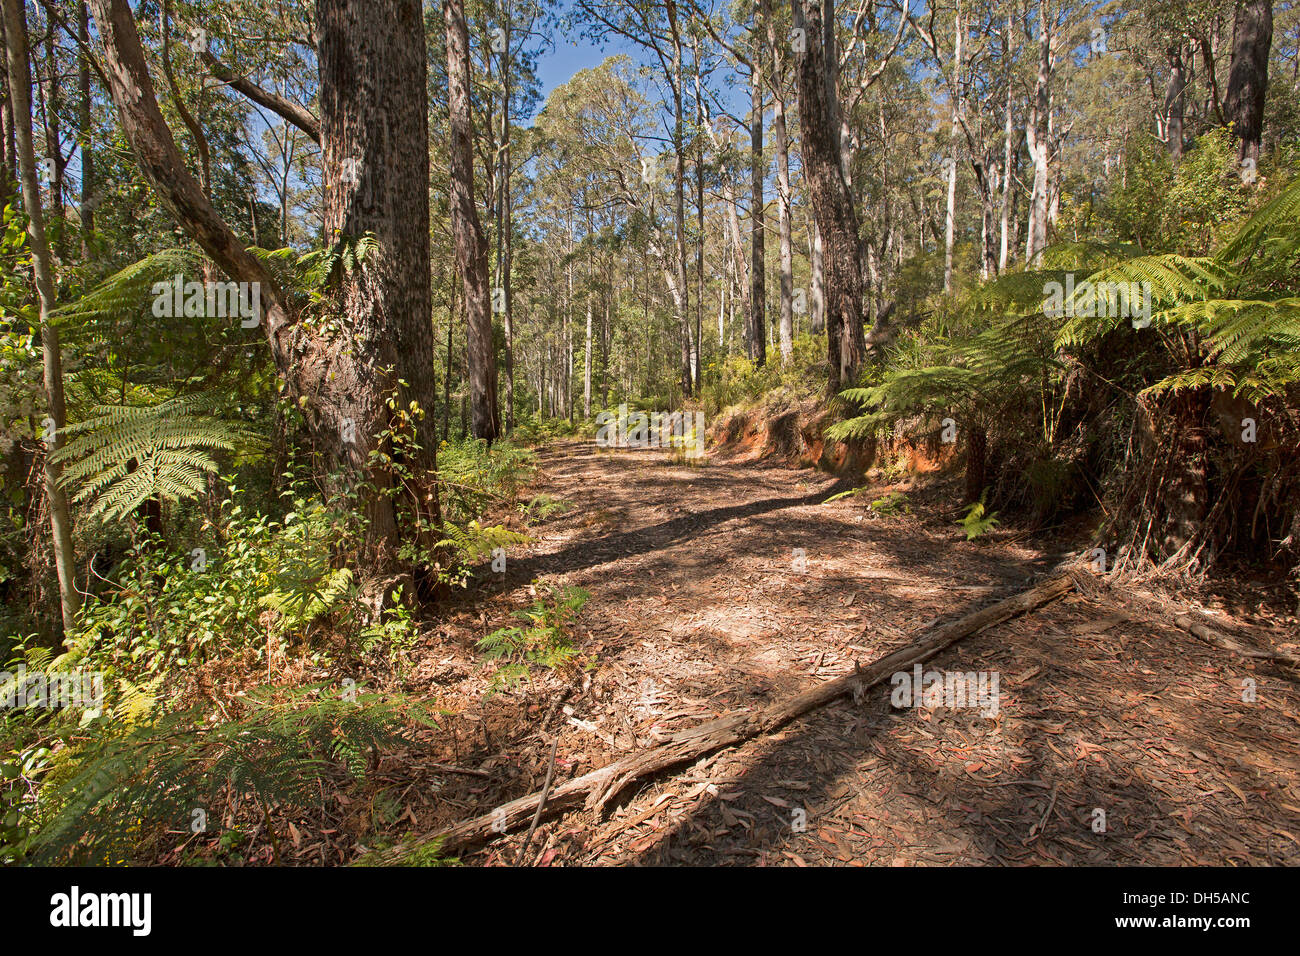 Narrow four wheel drive track lined with wildflowers and dense forest vegetation in Nowendoc National Park NSW Australia Stock Photo